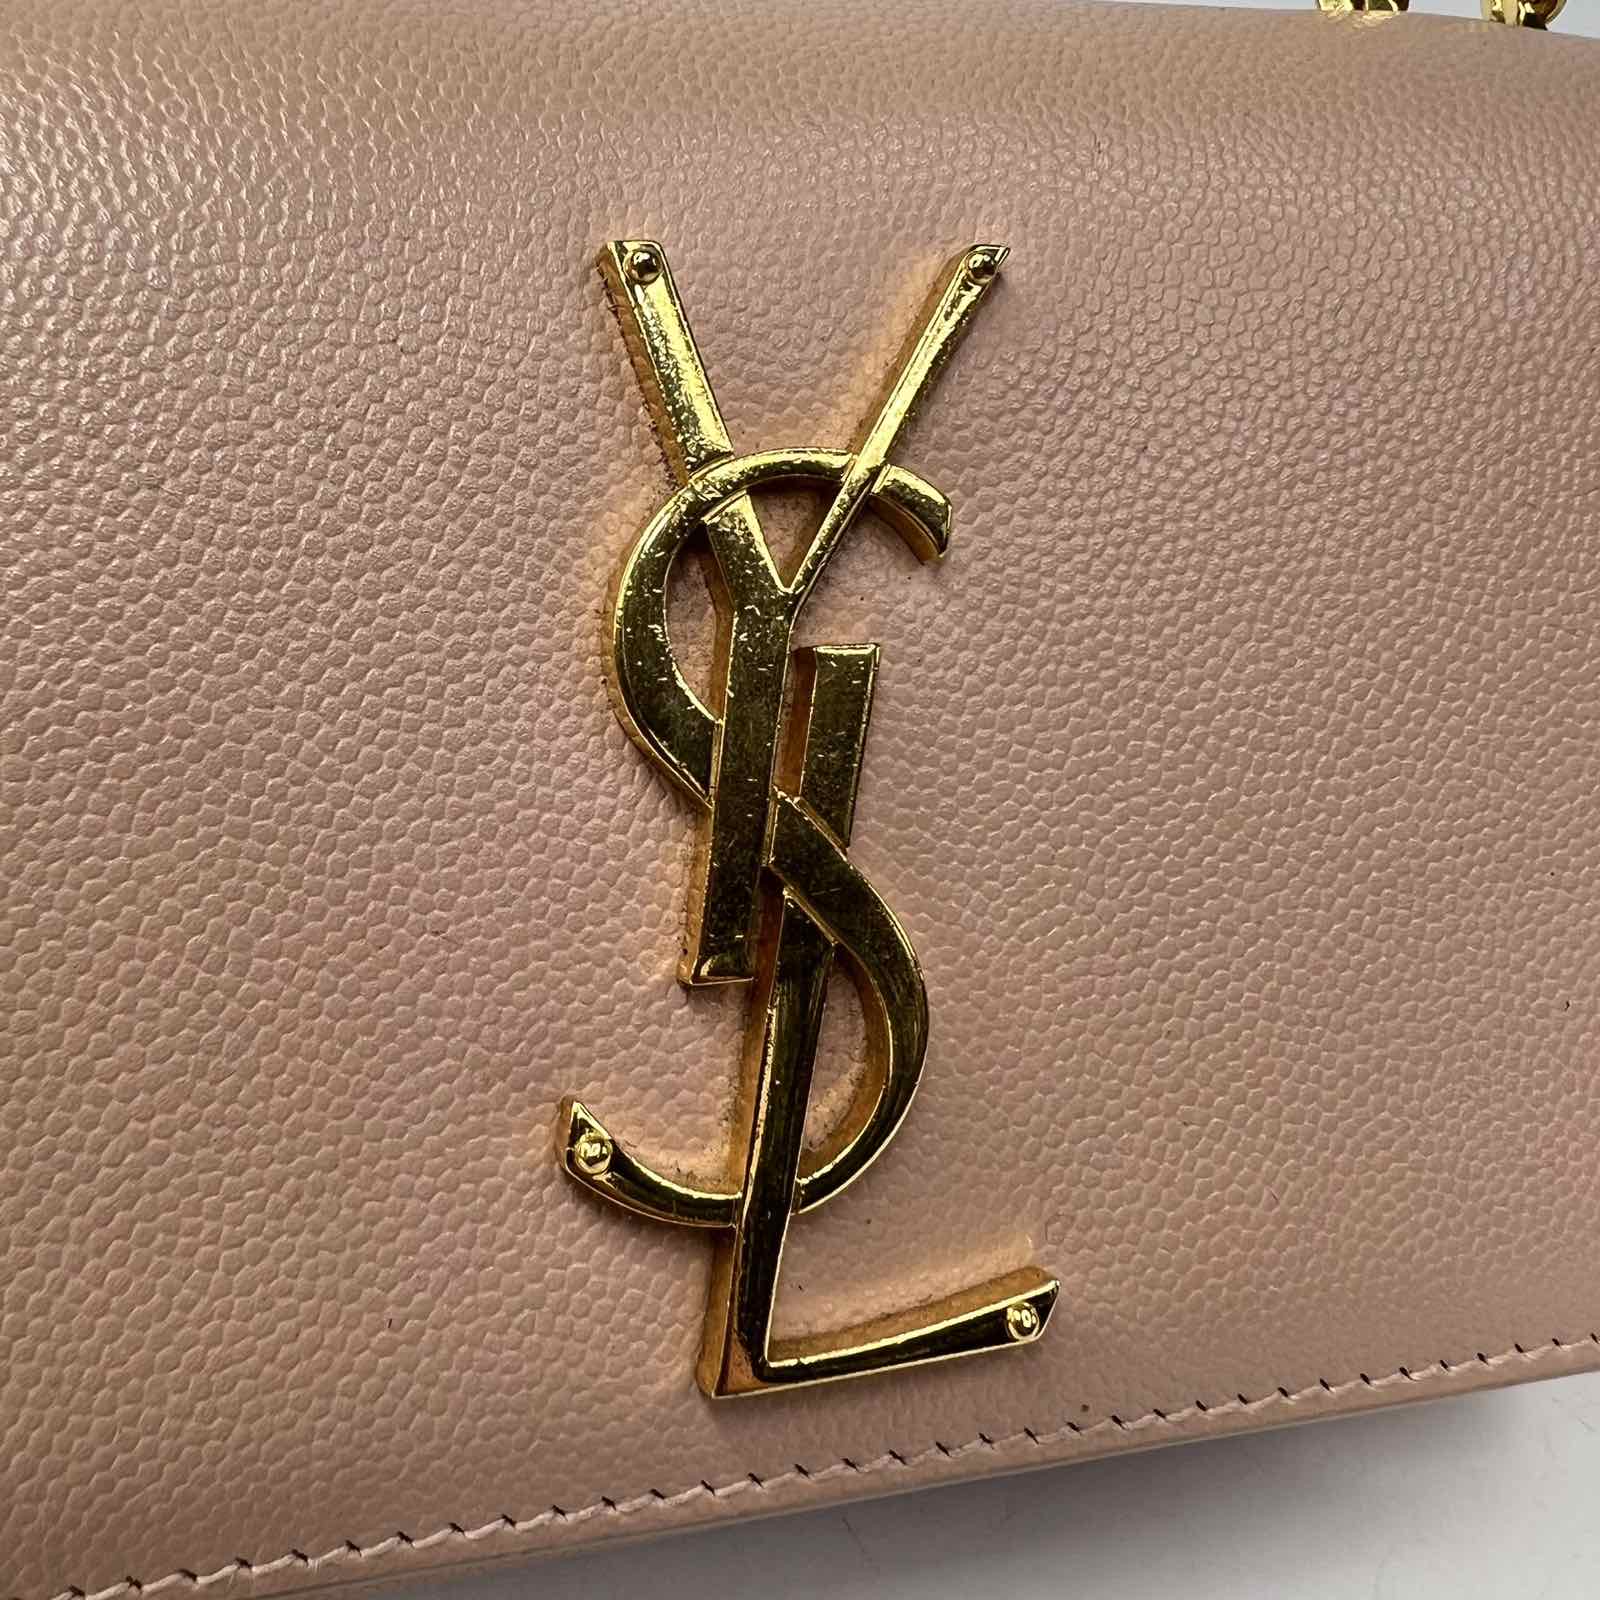 YSL Kate Small Blush Pink Grained Leather Gold Hardware. Made in Italy.  With care card & dustbag ❤️